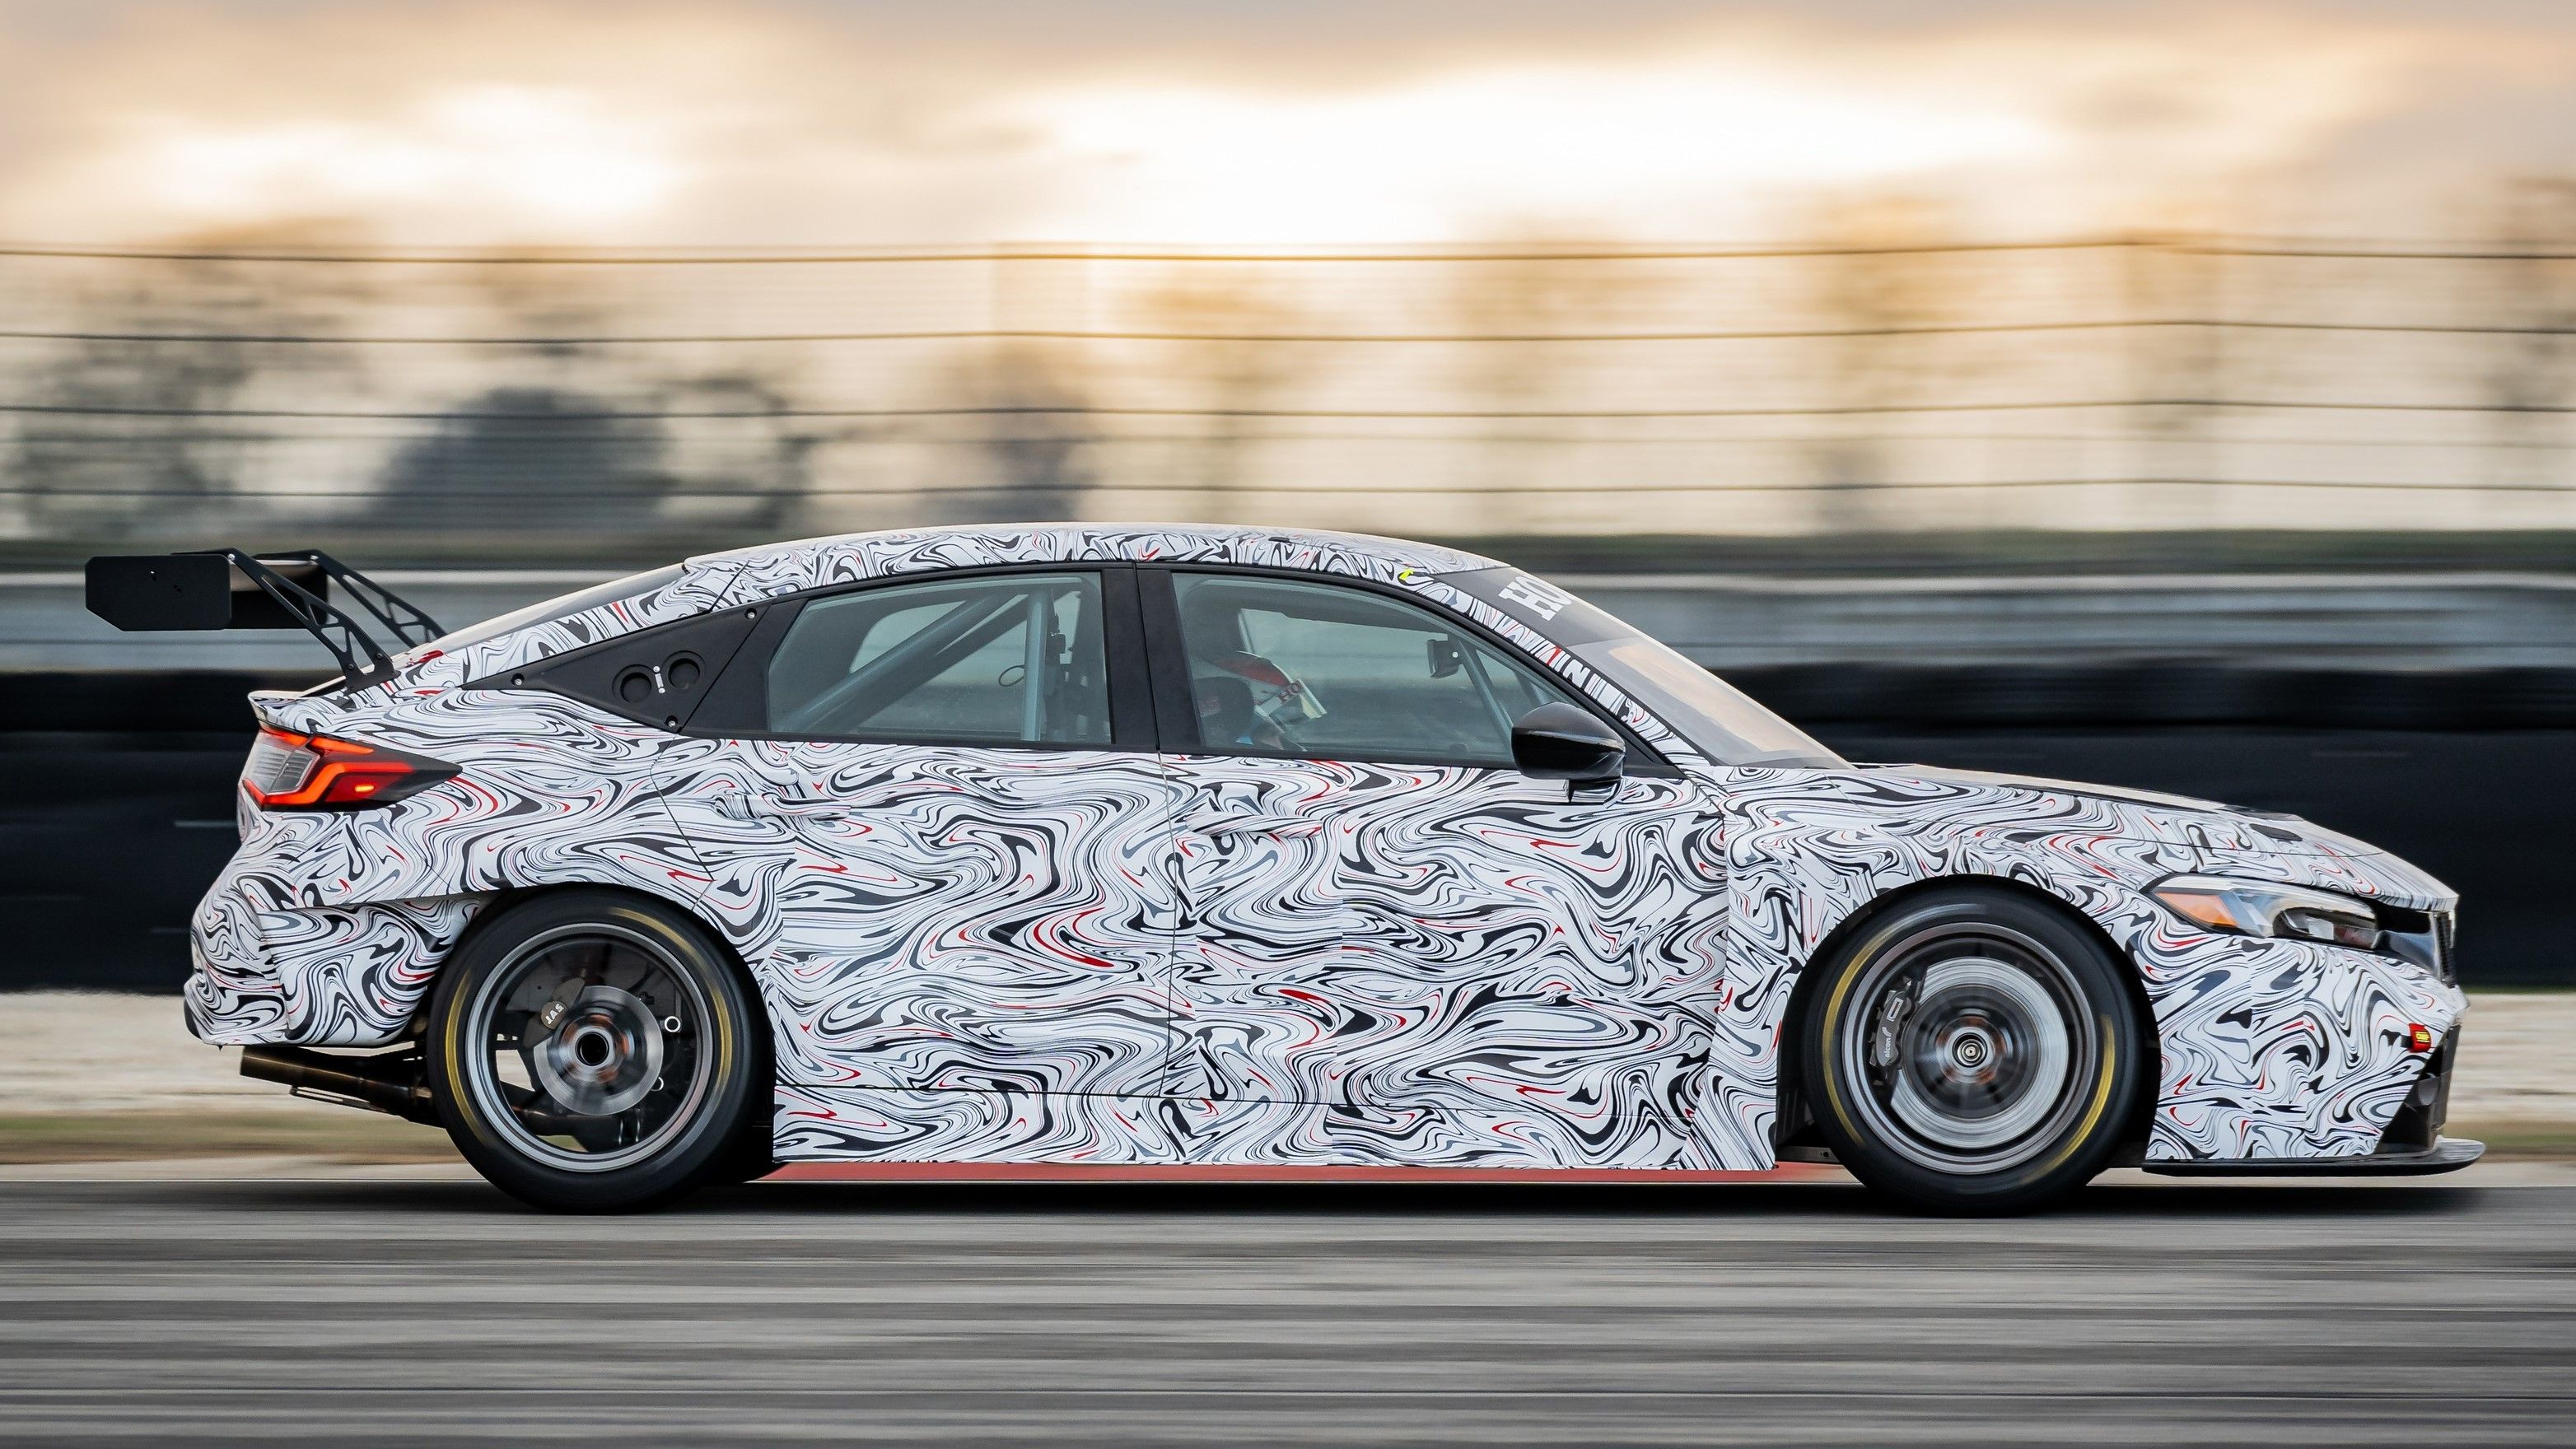 The all-new TCR machine had its first shakedown in Italy.